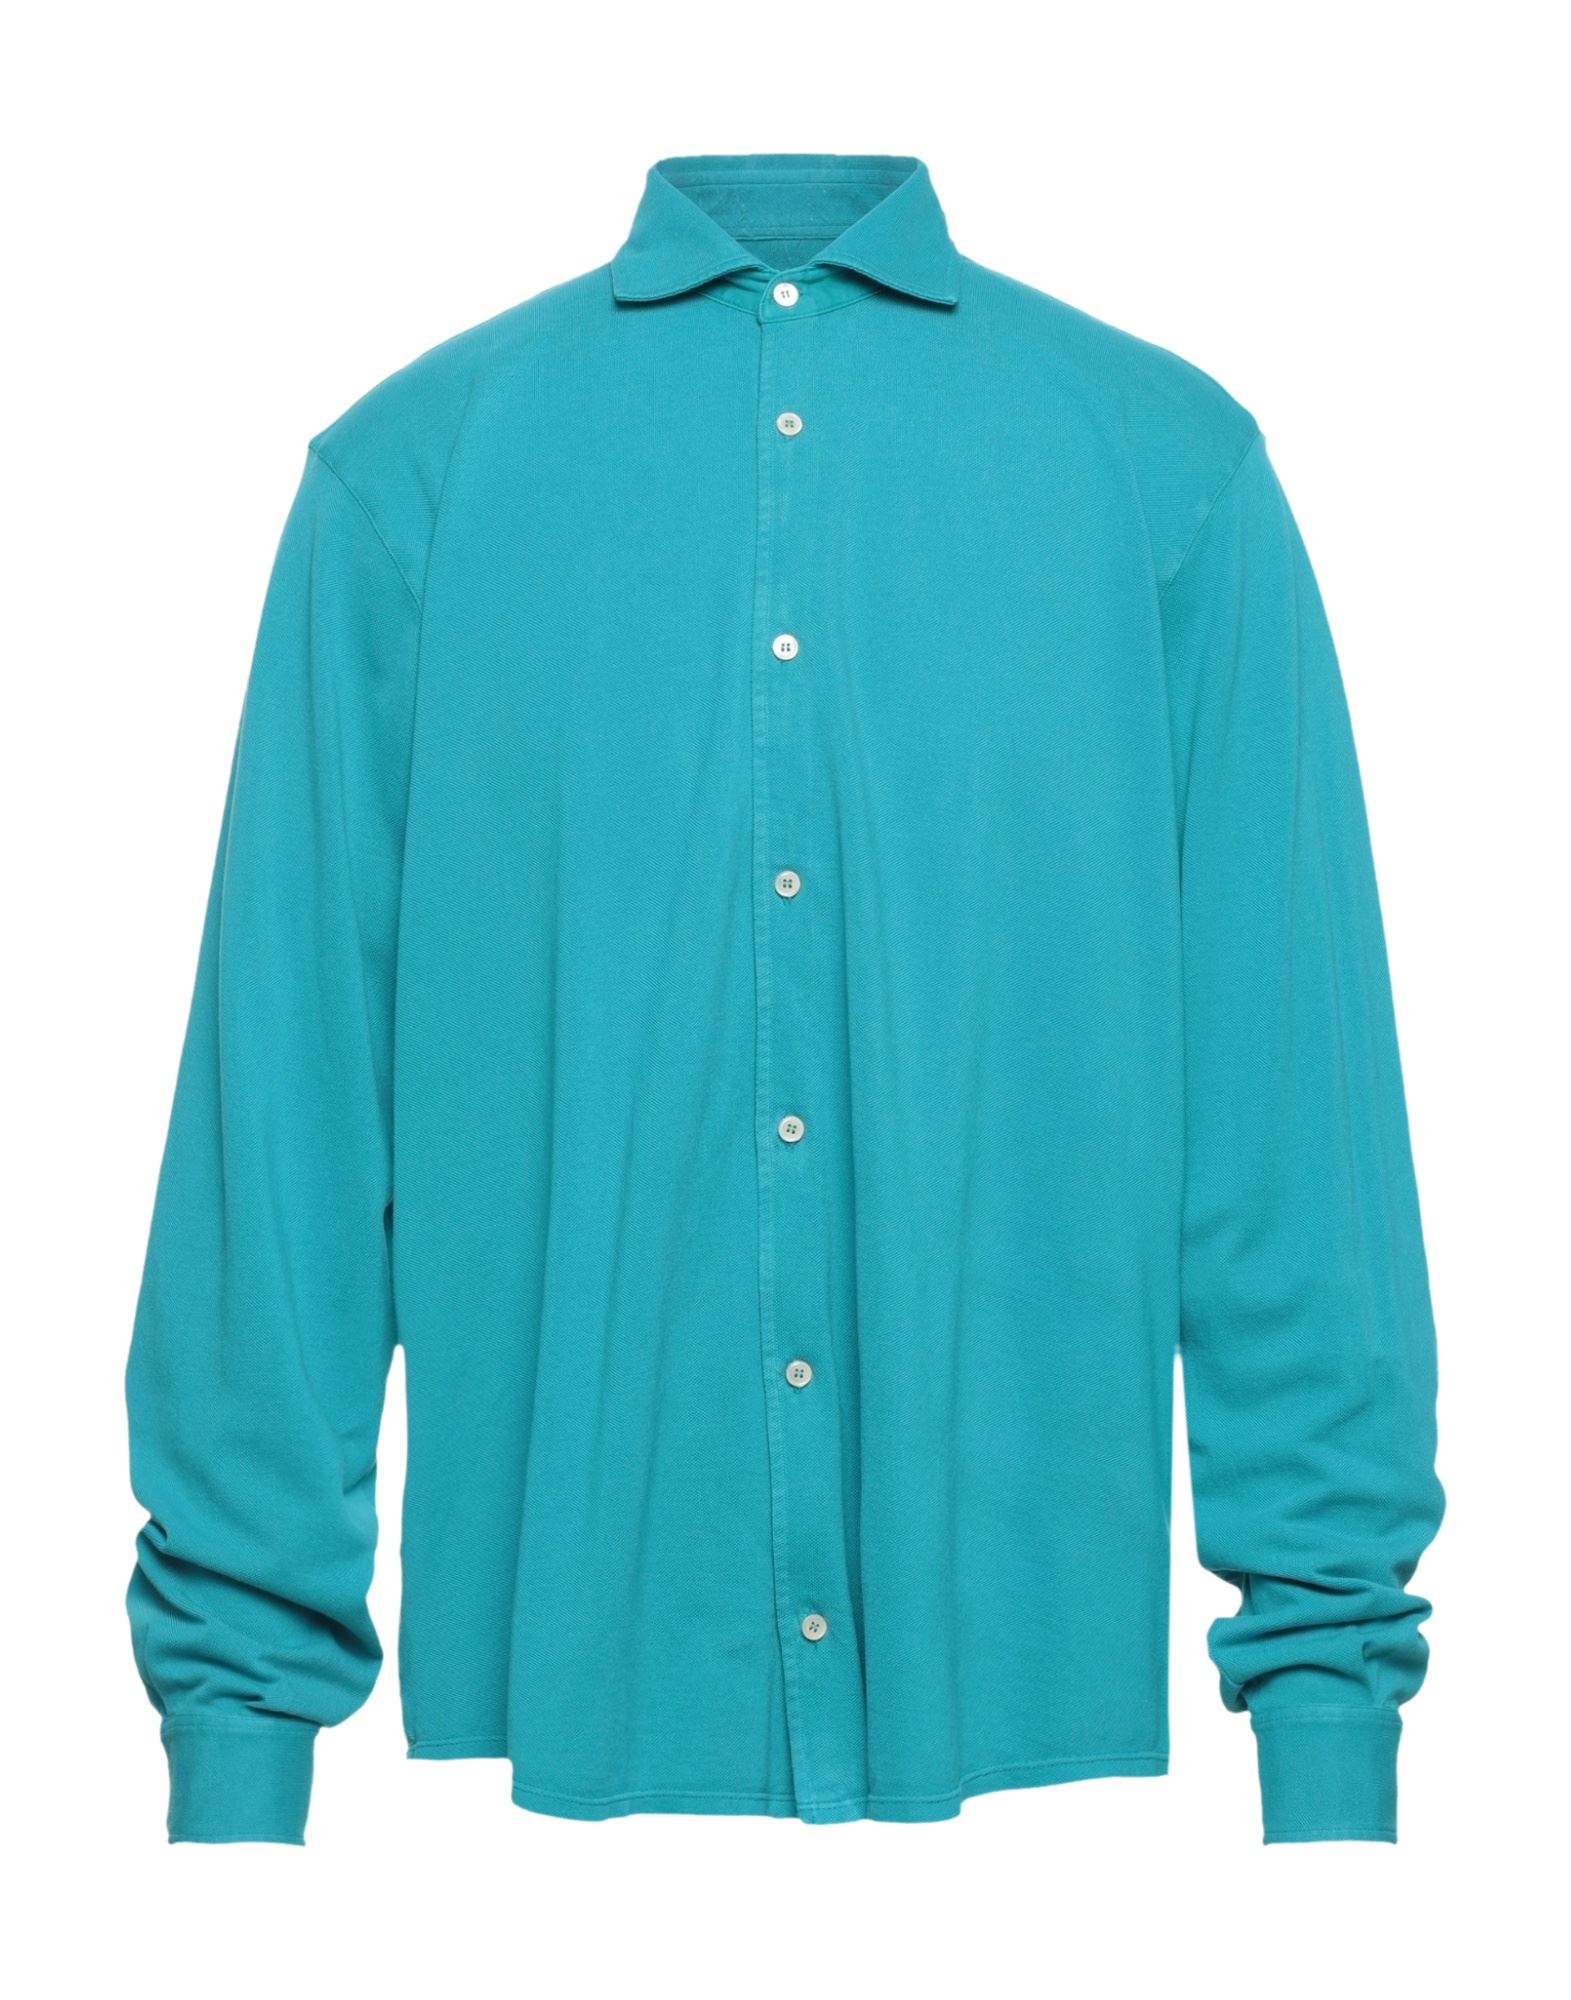 Fedeli Shirts In Turquoise